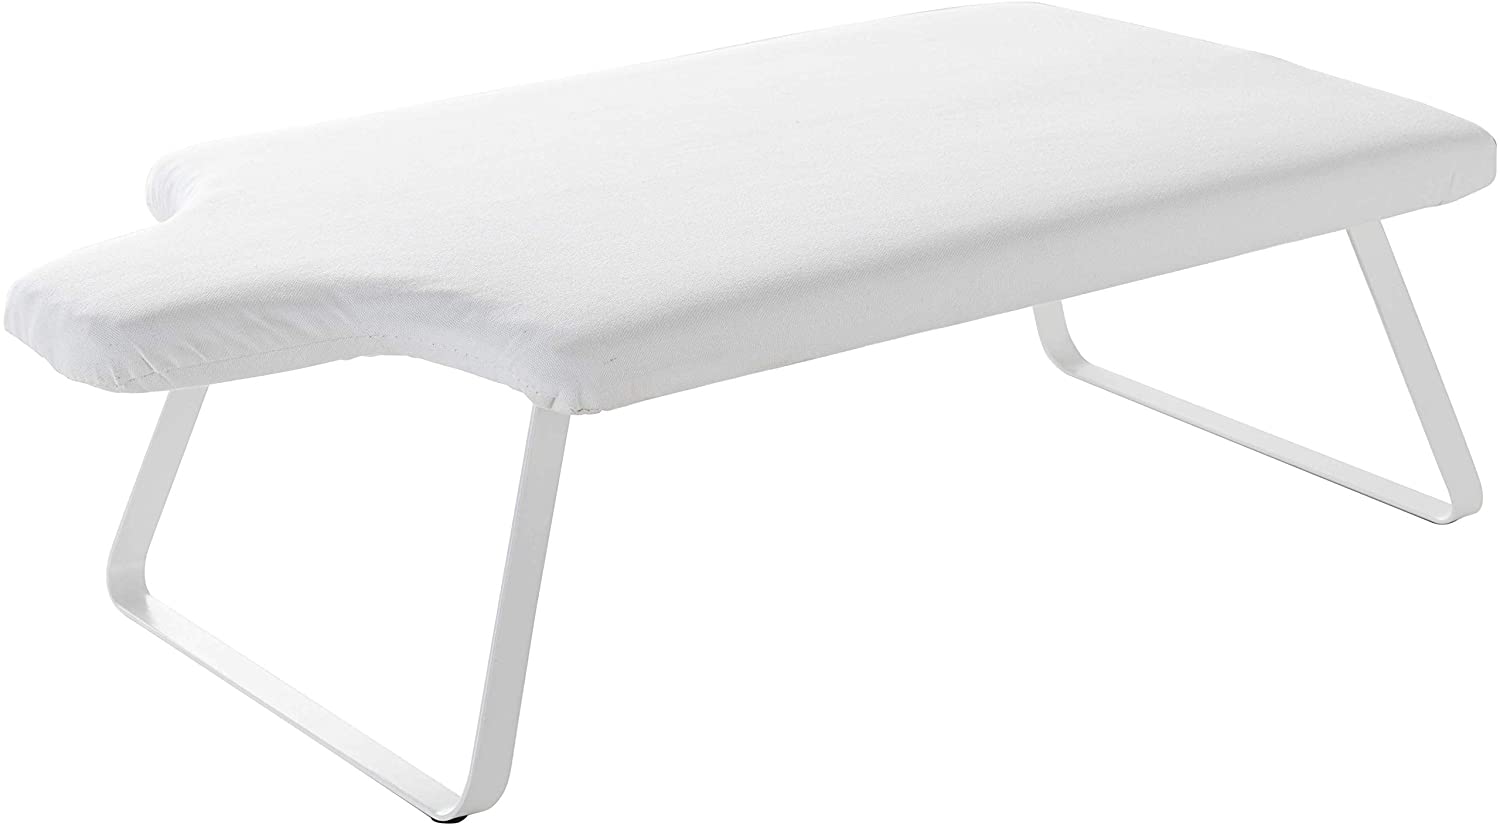 YJ4932 "tower" Ironing Board Torso Type", White 約W70XD36XH21cm  with hook to store   (pcs)